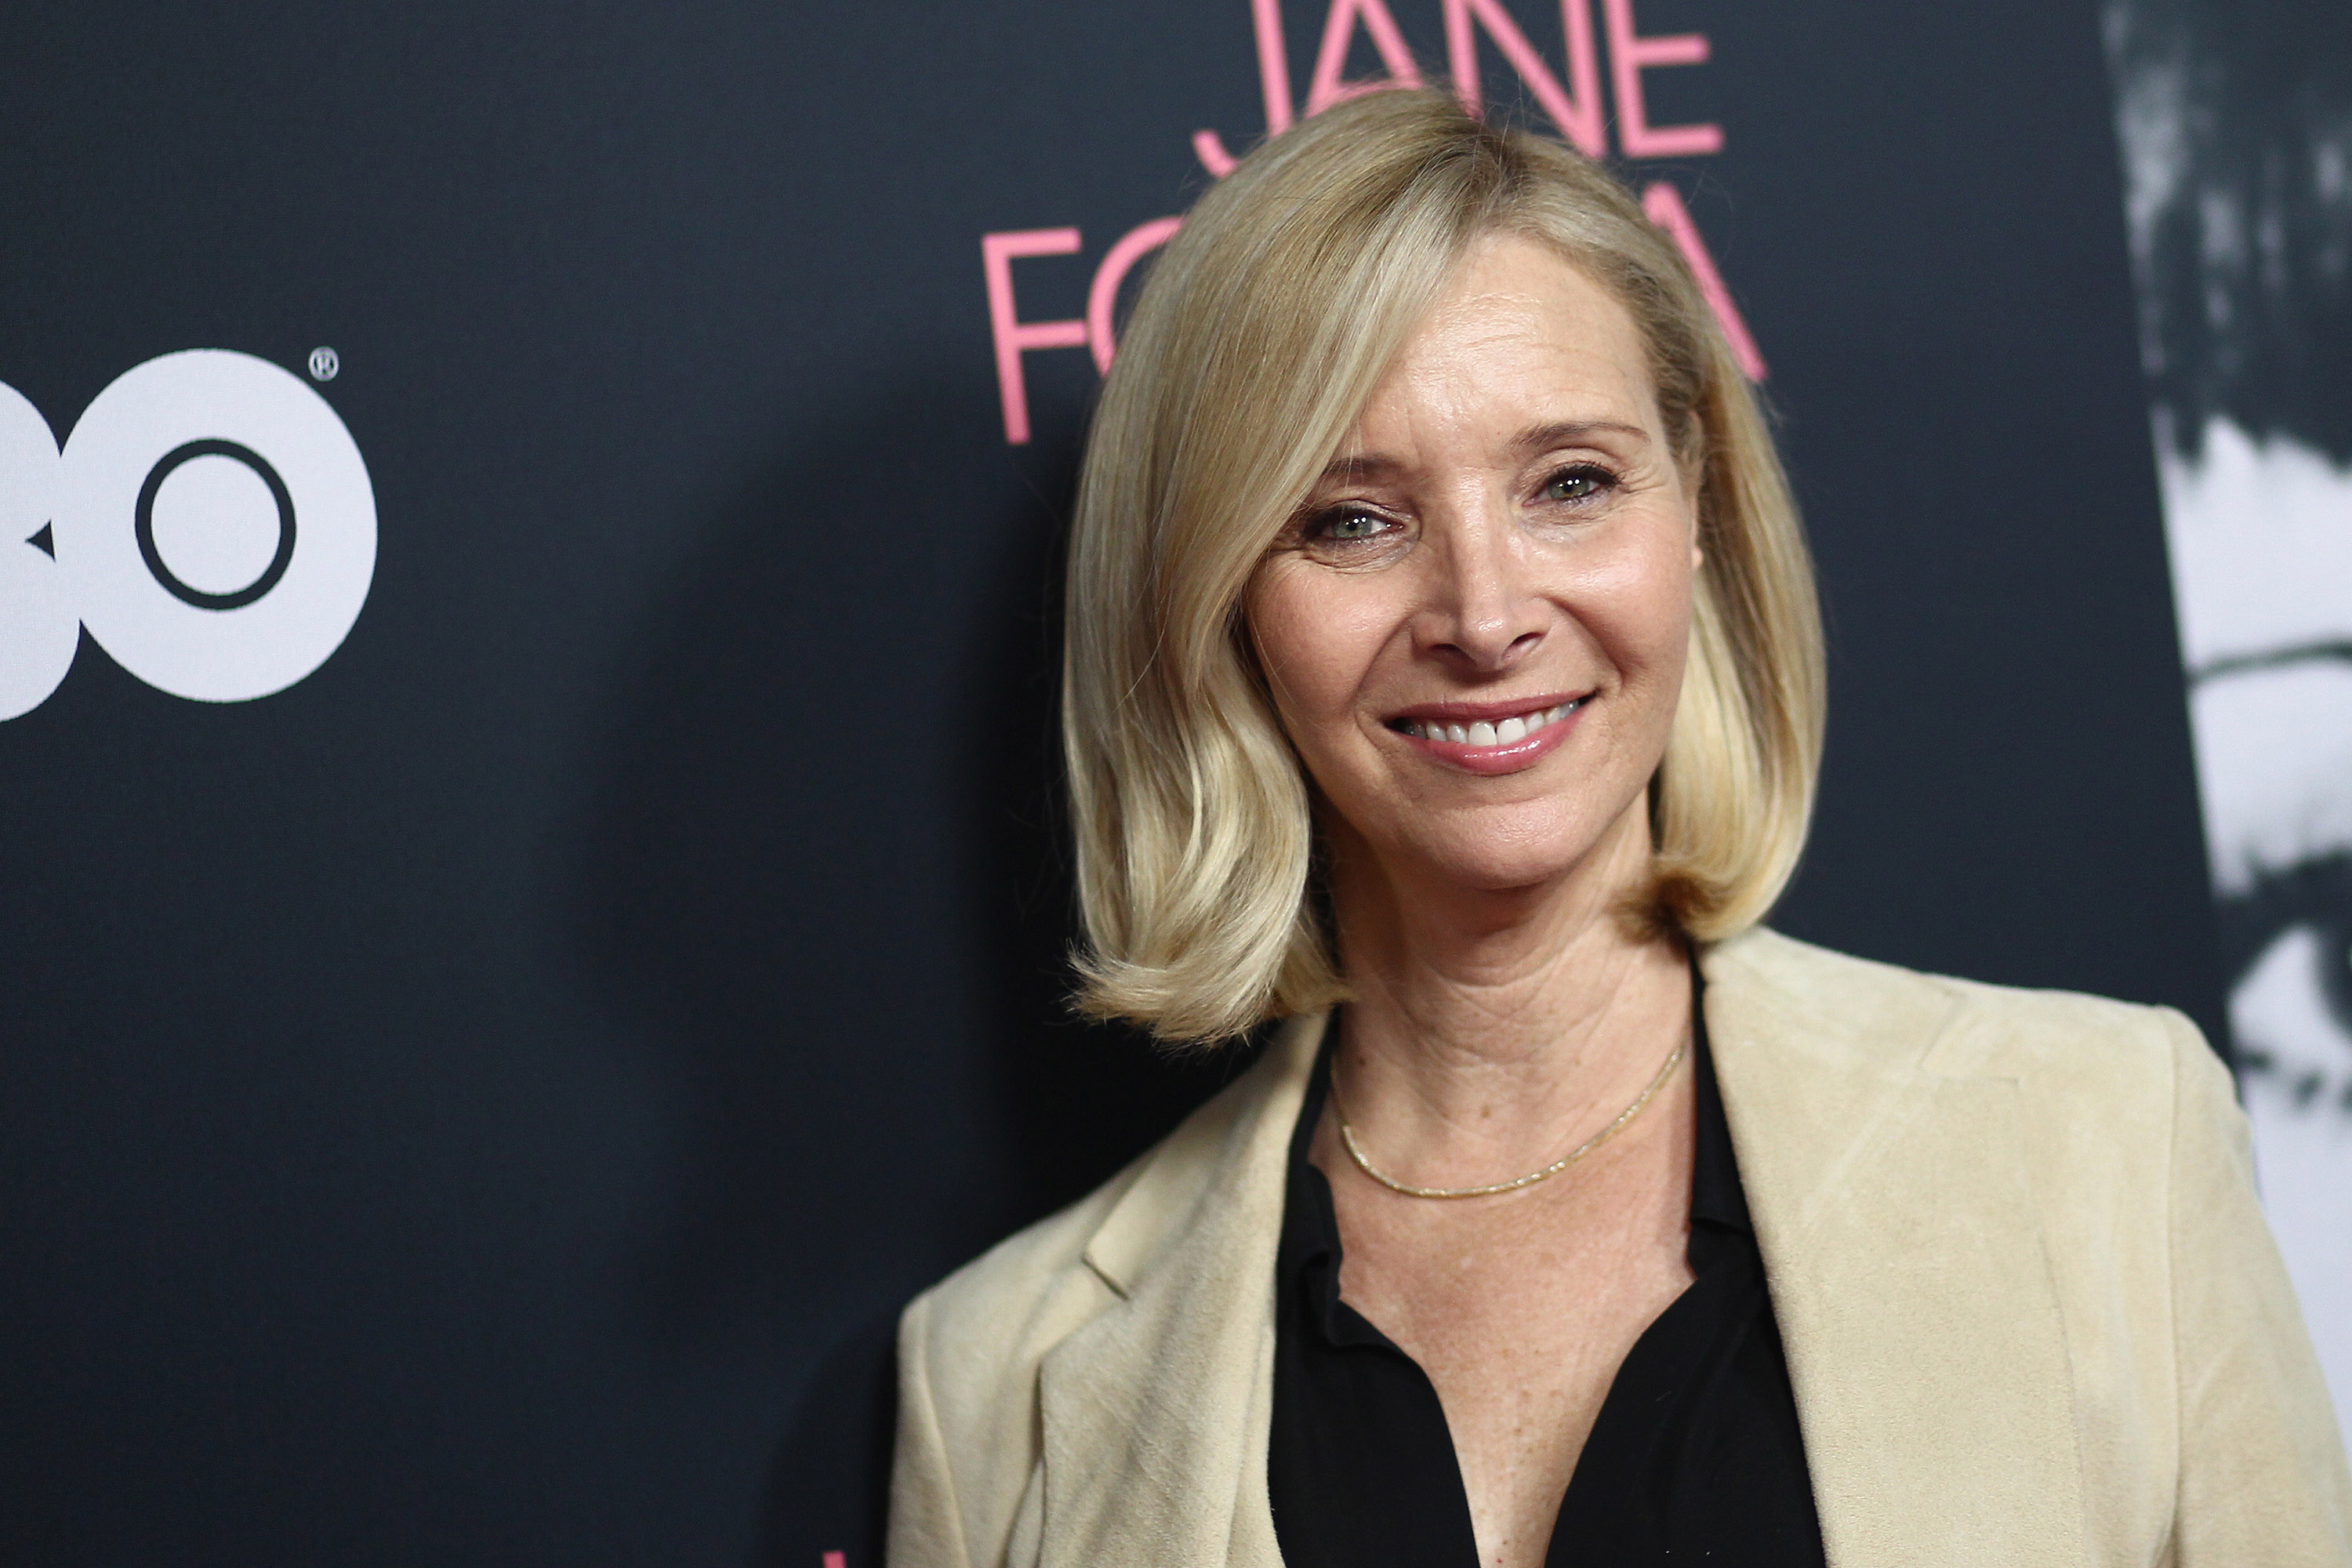 ‘Friends’ Star, Lisa Kudrow, Appeared On ‘Cheers’ Before Landing and Losing a Role on ‘Frasier’